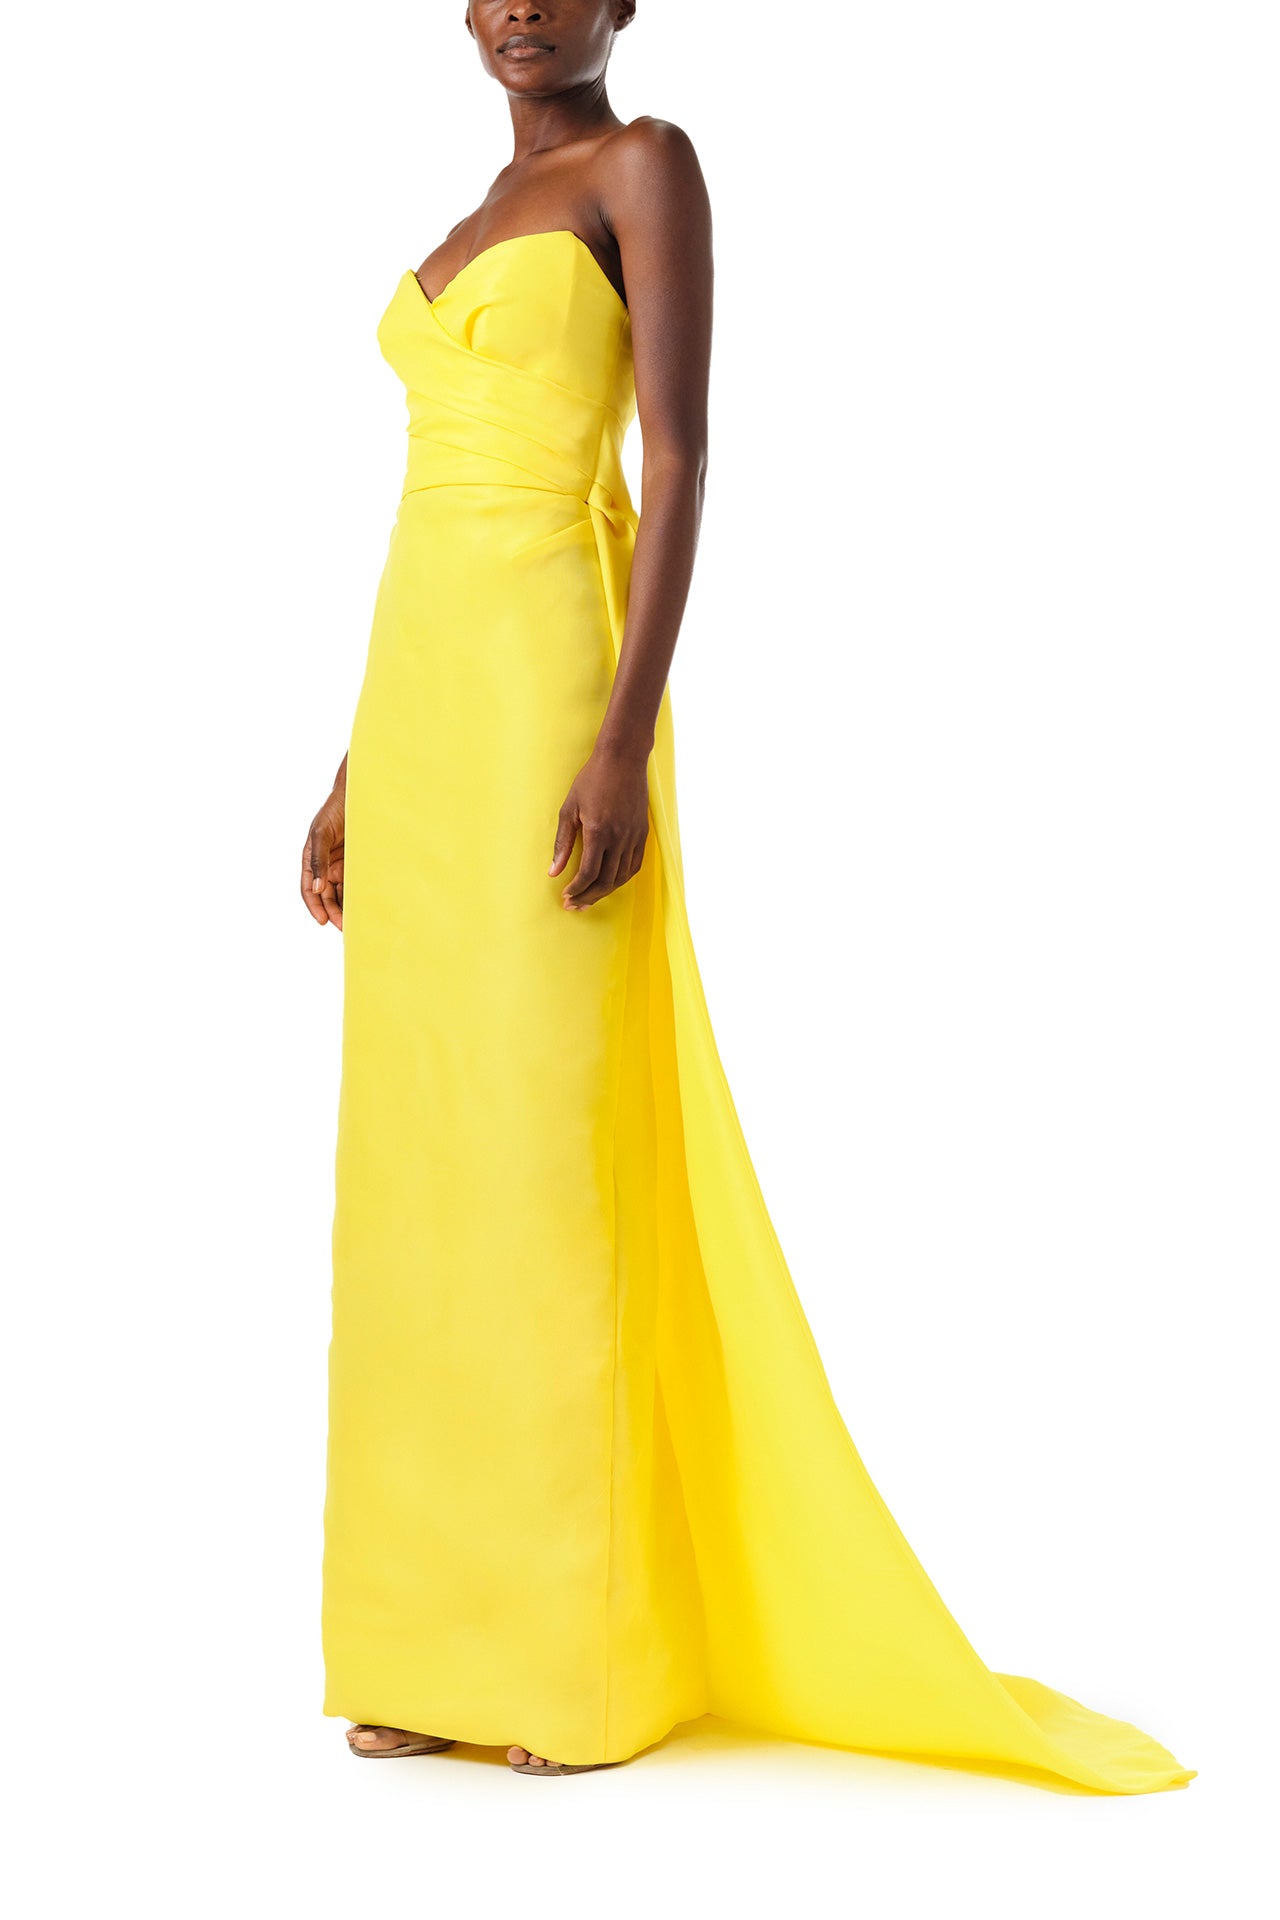 Monique Lhuillier Spring 2024 yellow strapless gown with sweetheart neckline and train - left side.